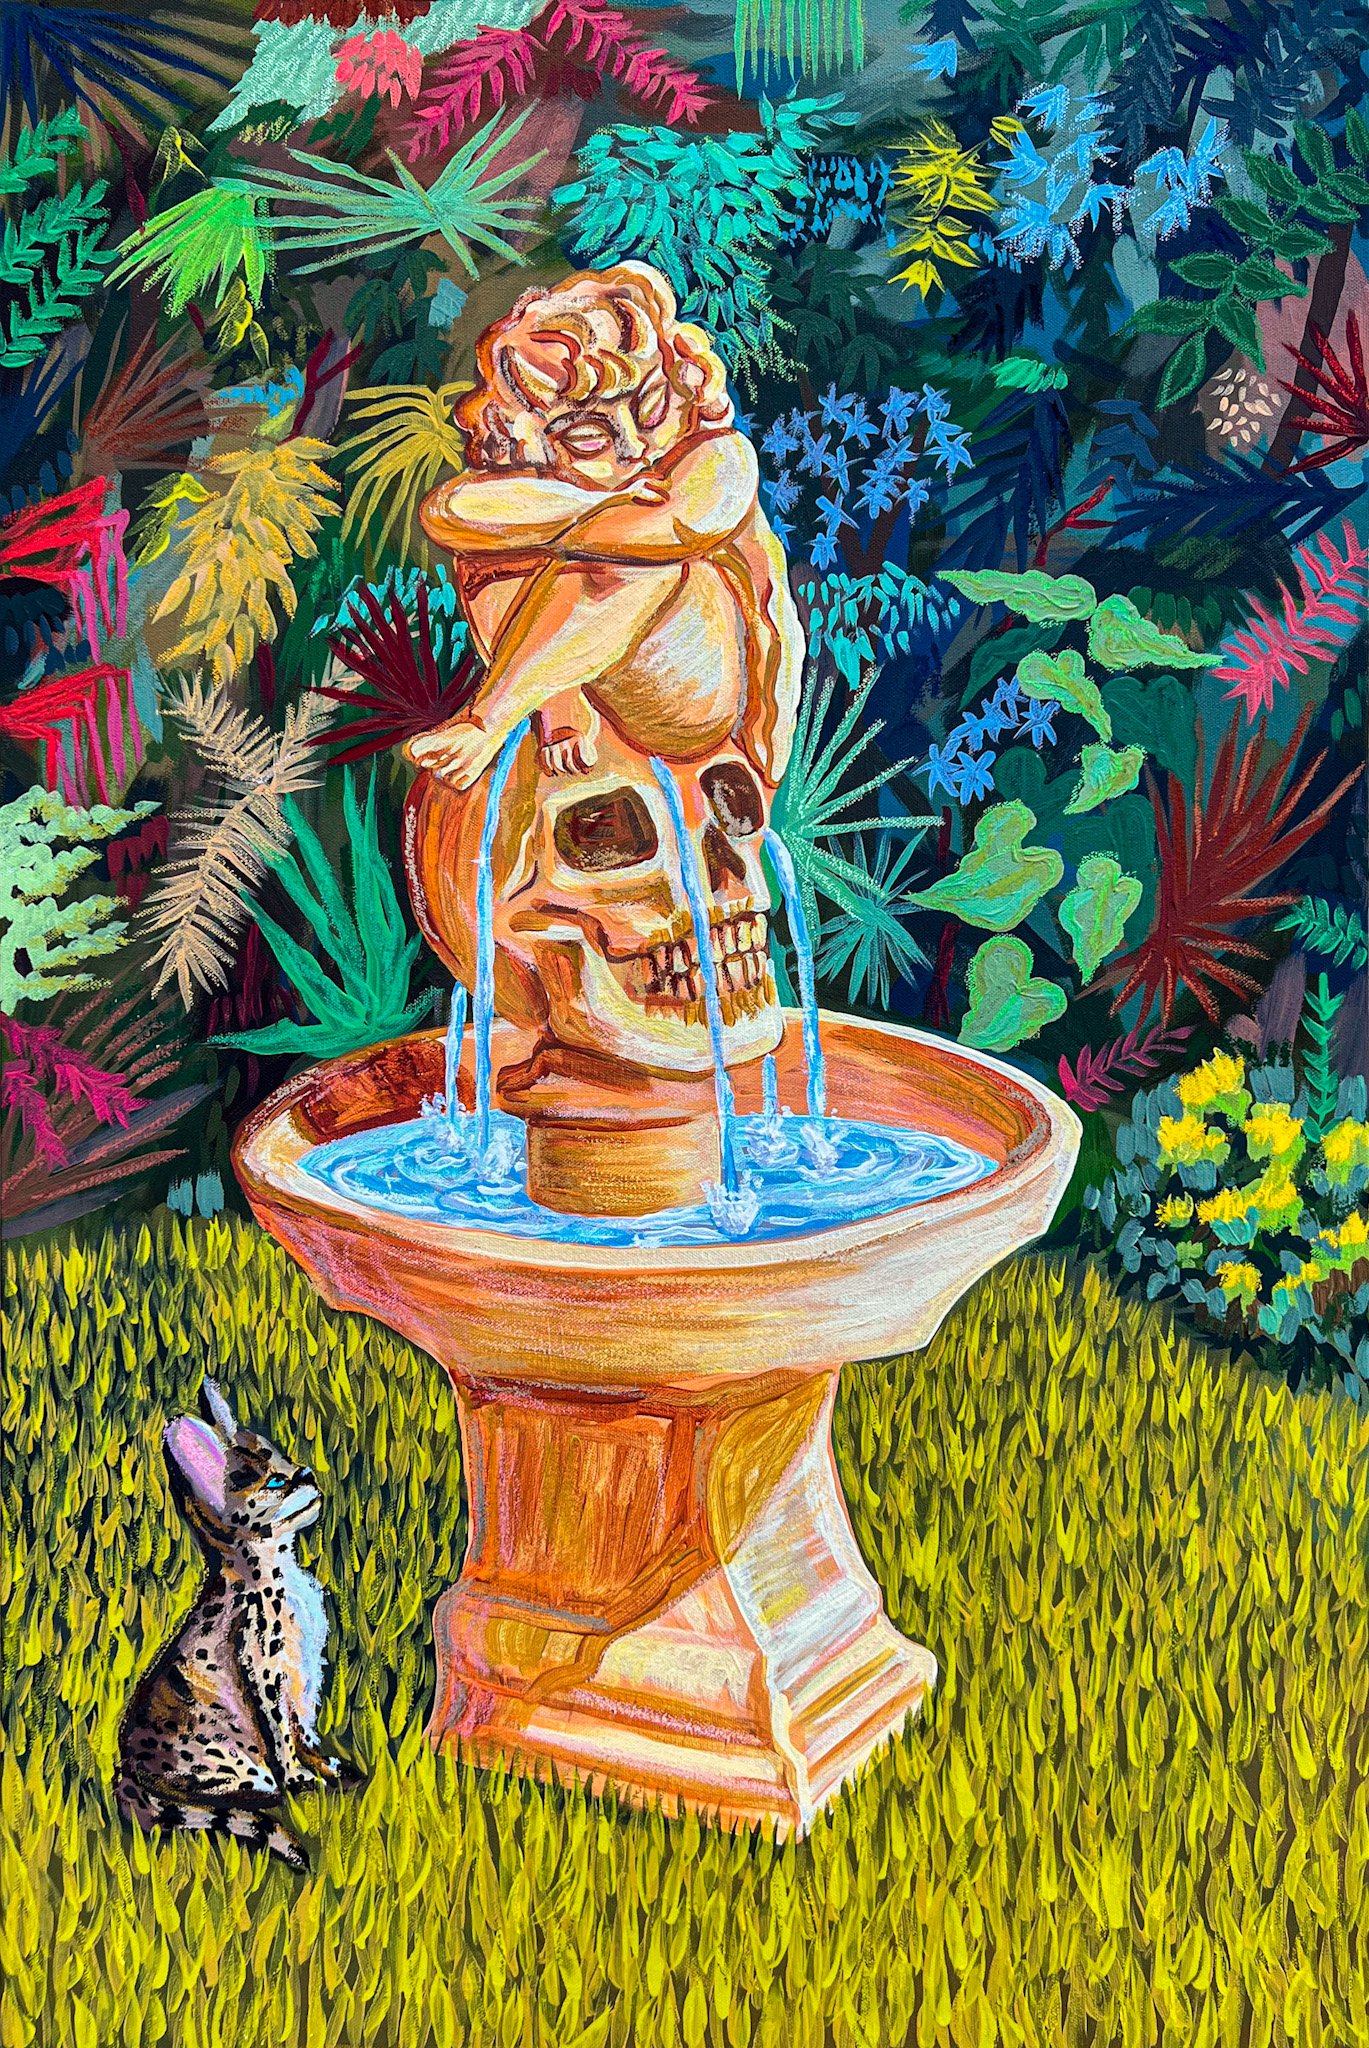 Fountain and Baby Ocelot